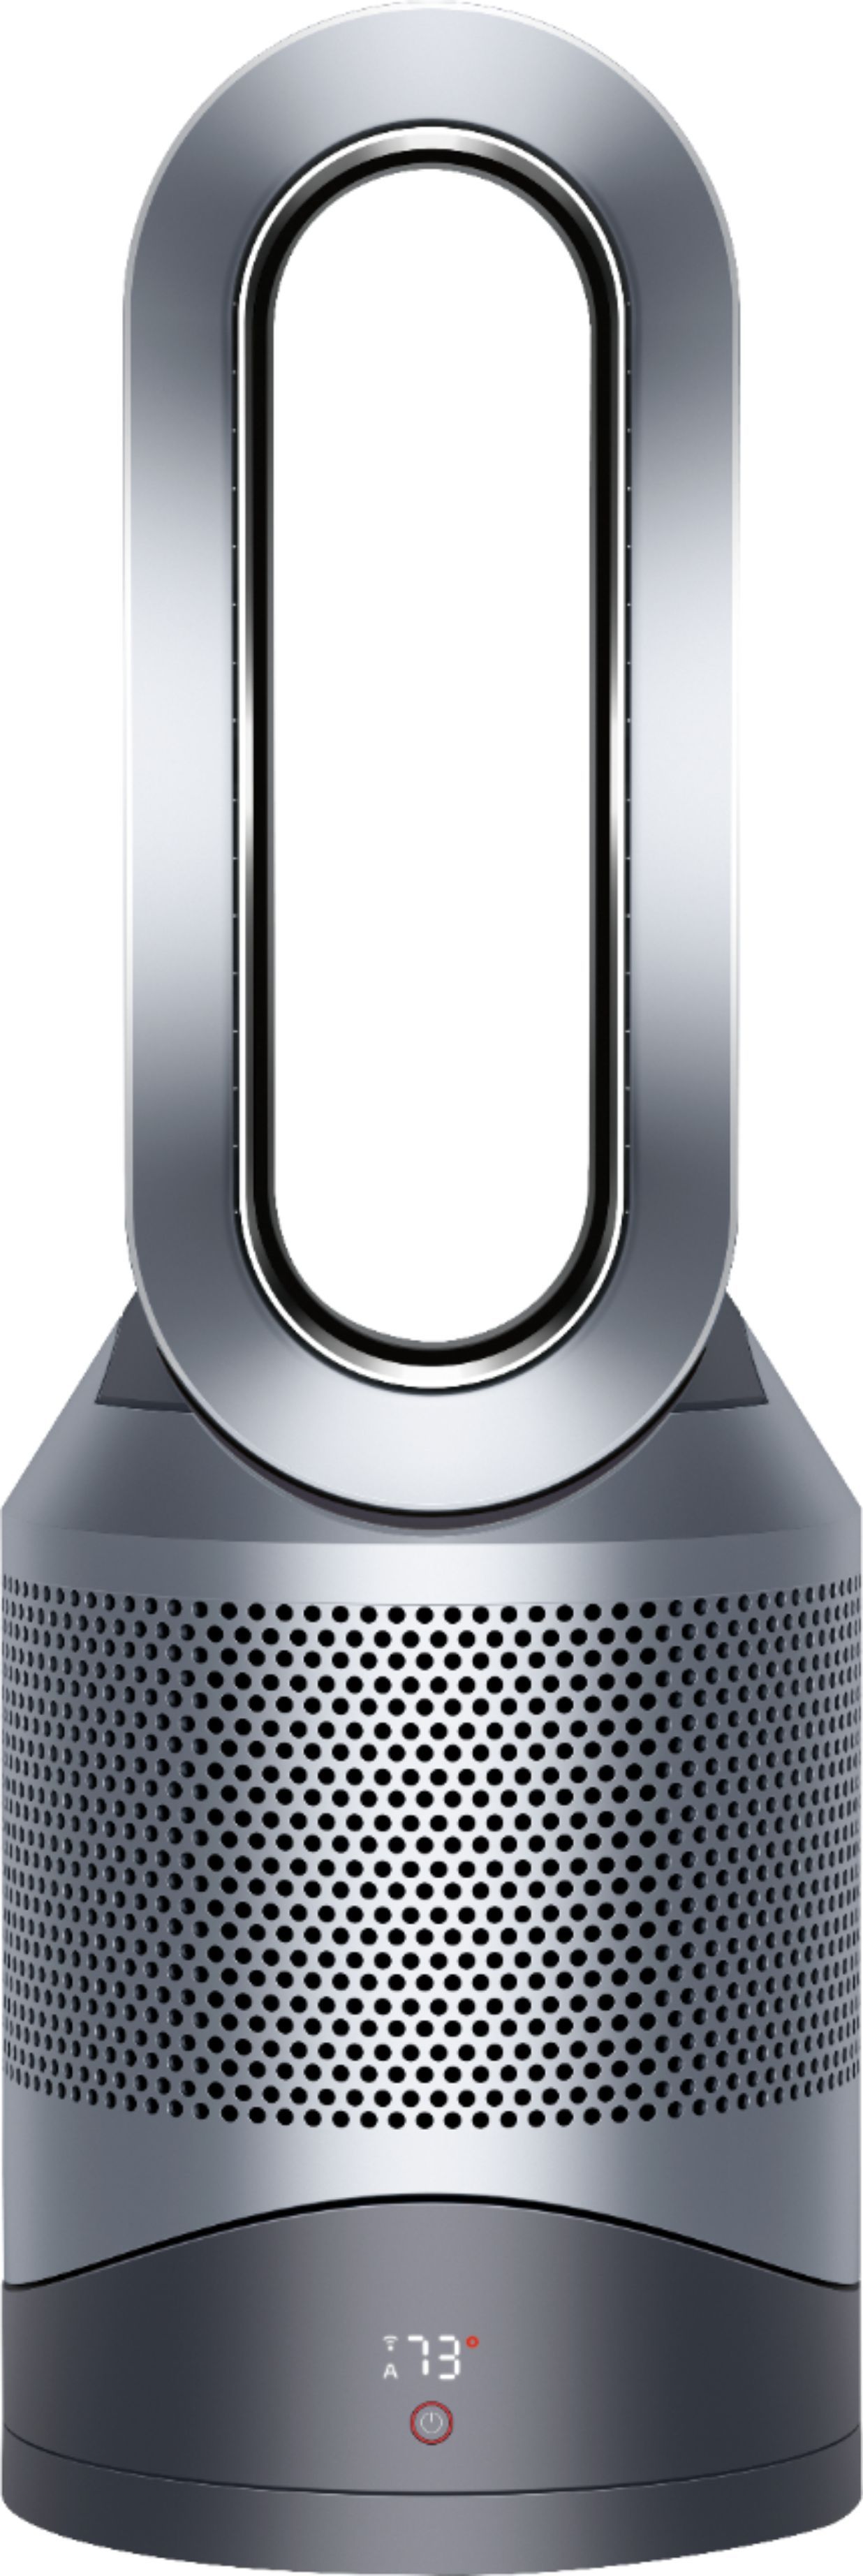 Dyson HP01 Pure Hot + Cool Air Purifier, Heater and Fan Iron/Silver 310105-01 - Best Buy | Best Buy U.S.